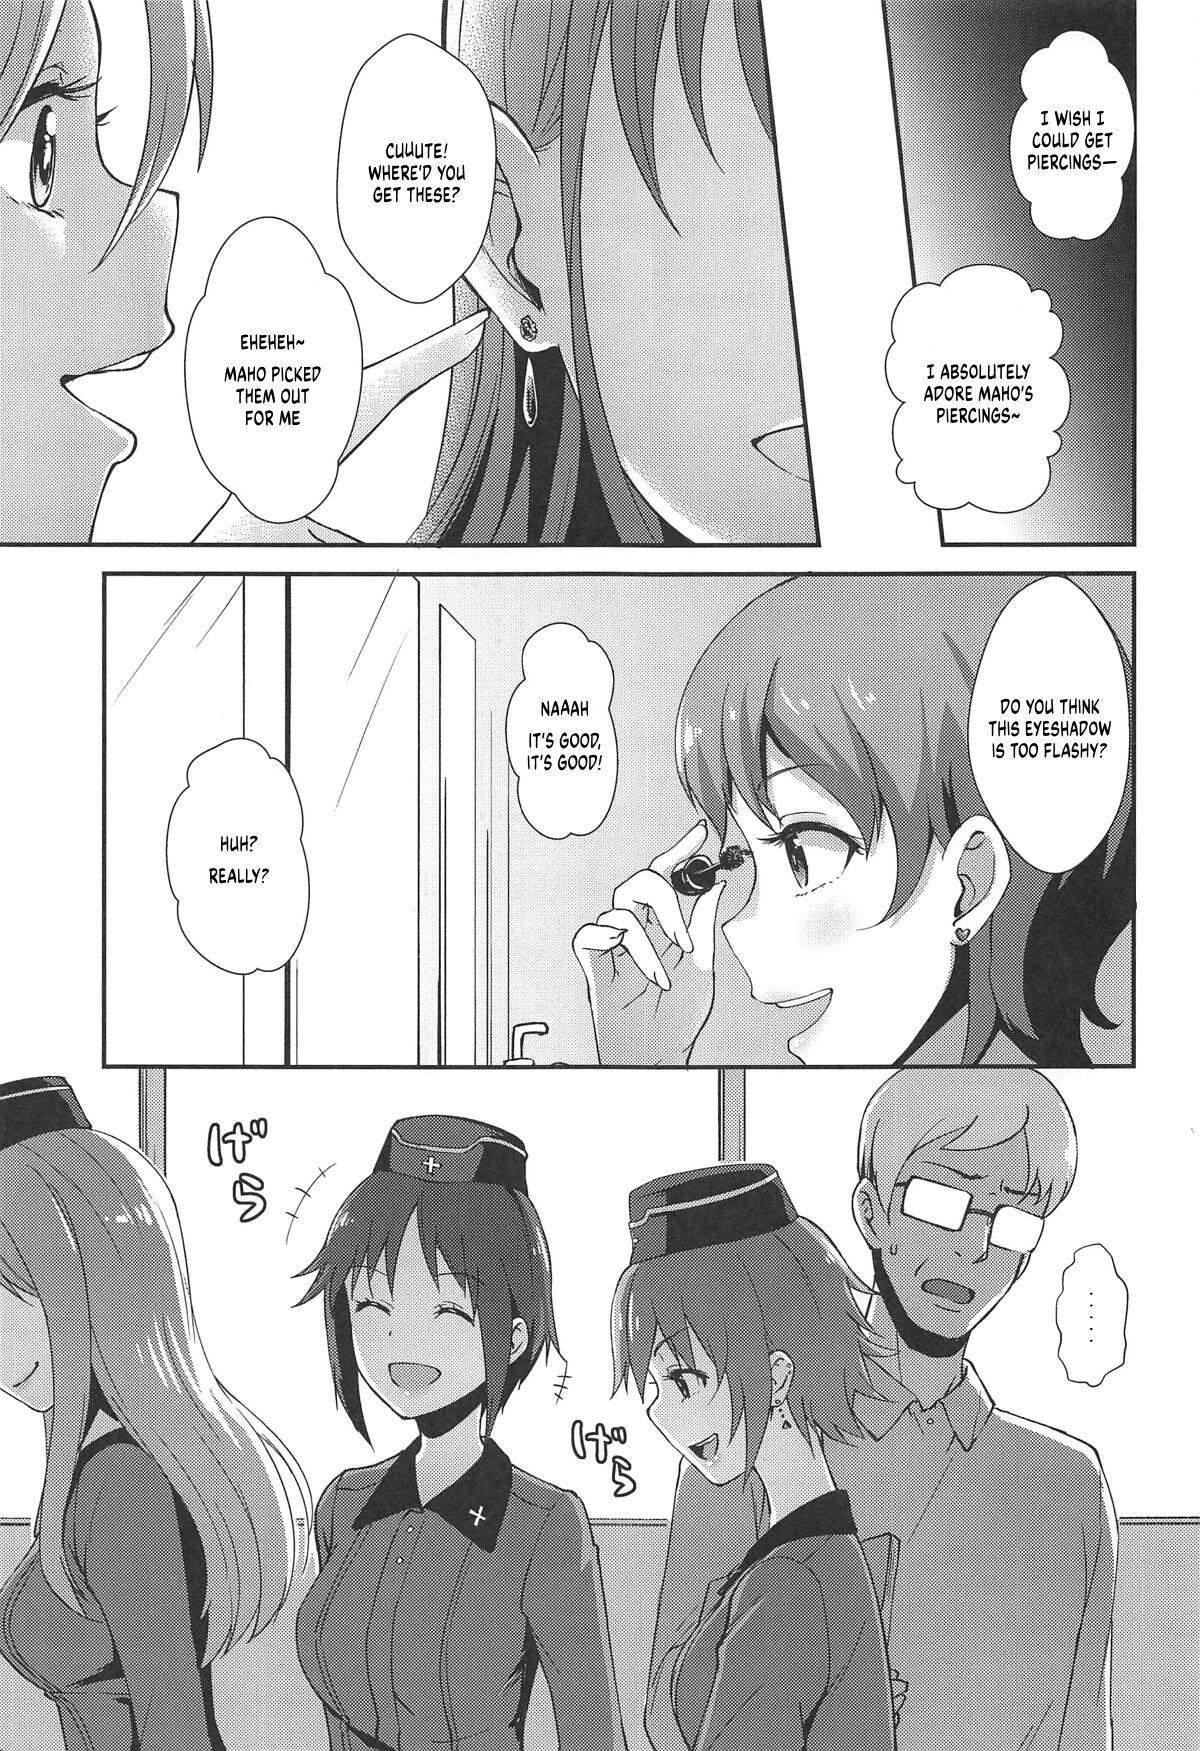 The Way How a Matriarch is Brought Up - Maho's Case, Bottom 12